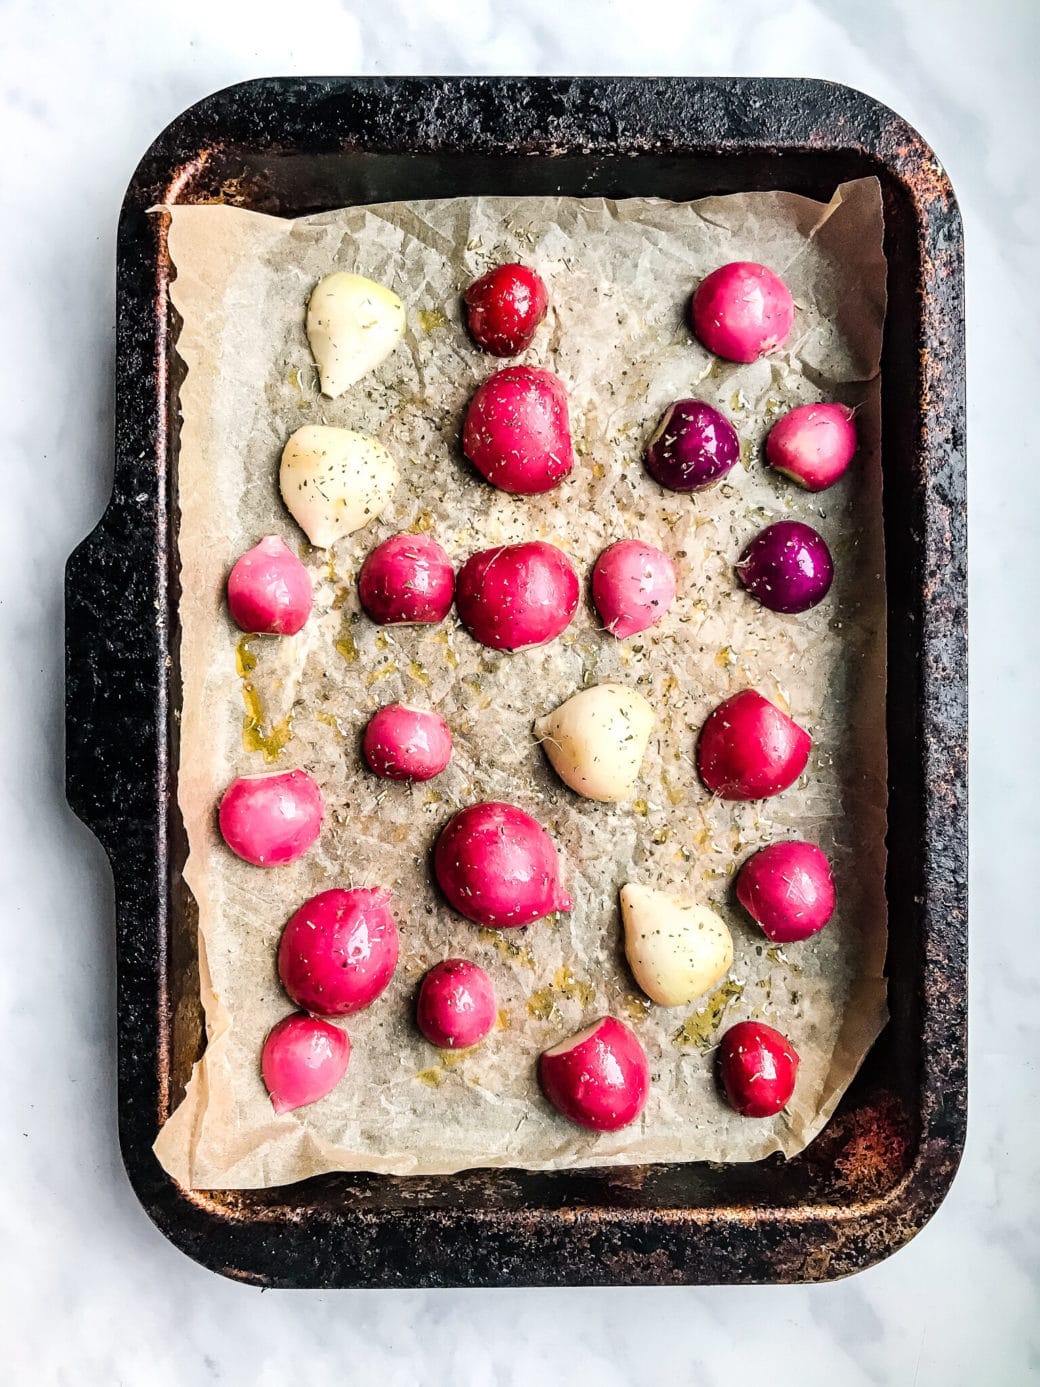 radishes that have been sliced in half and tossed in olive oil, salt, and dried rosemary resting on a prepared baking sheet ready for the oven